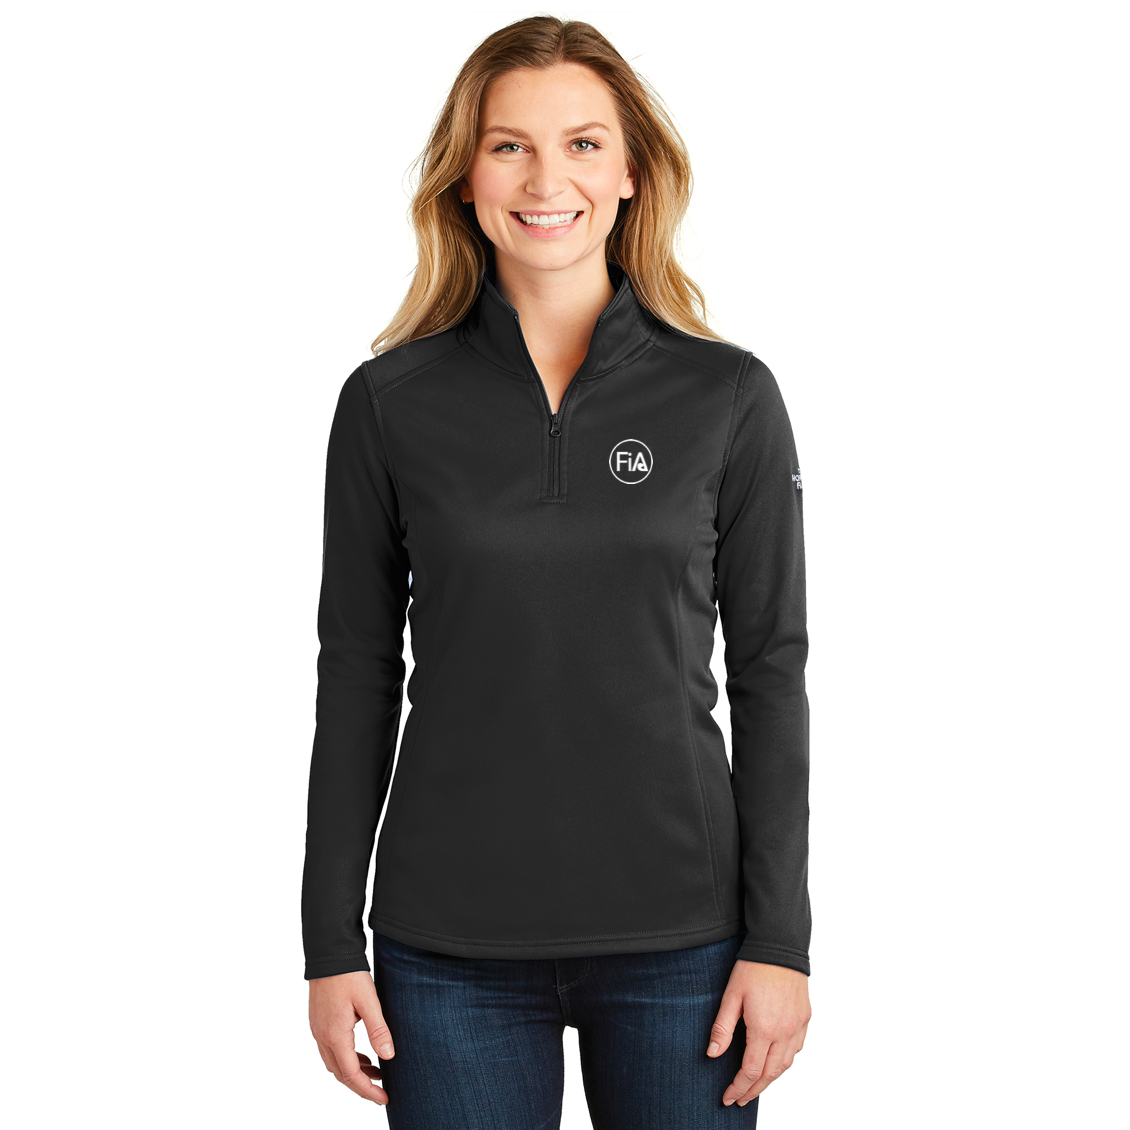 FiA The North Face Ladies Tech 1/4-Zip Fleece - Made to Order